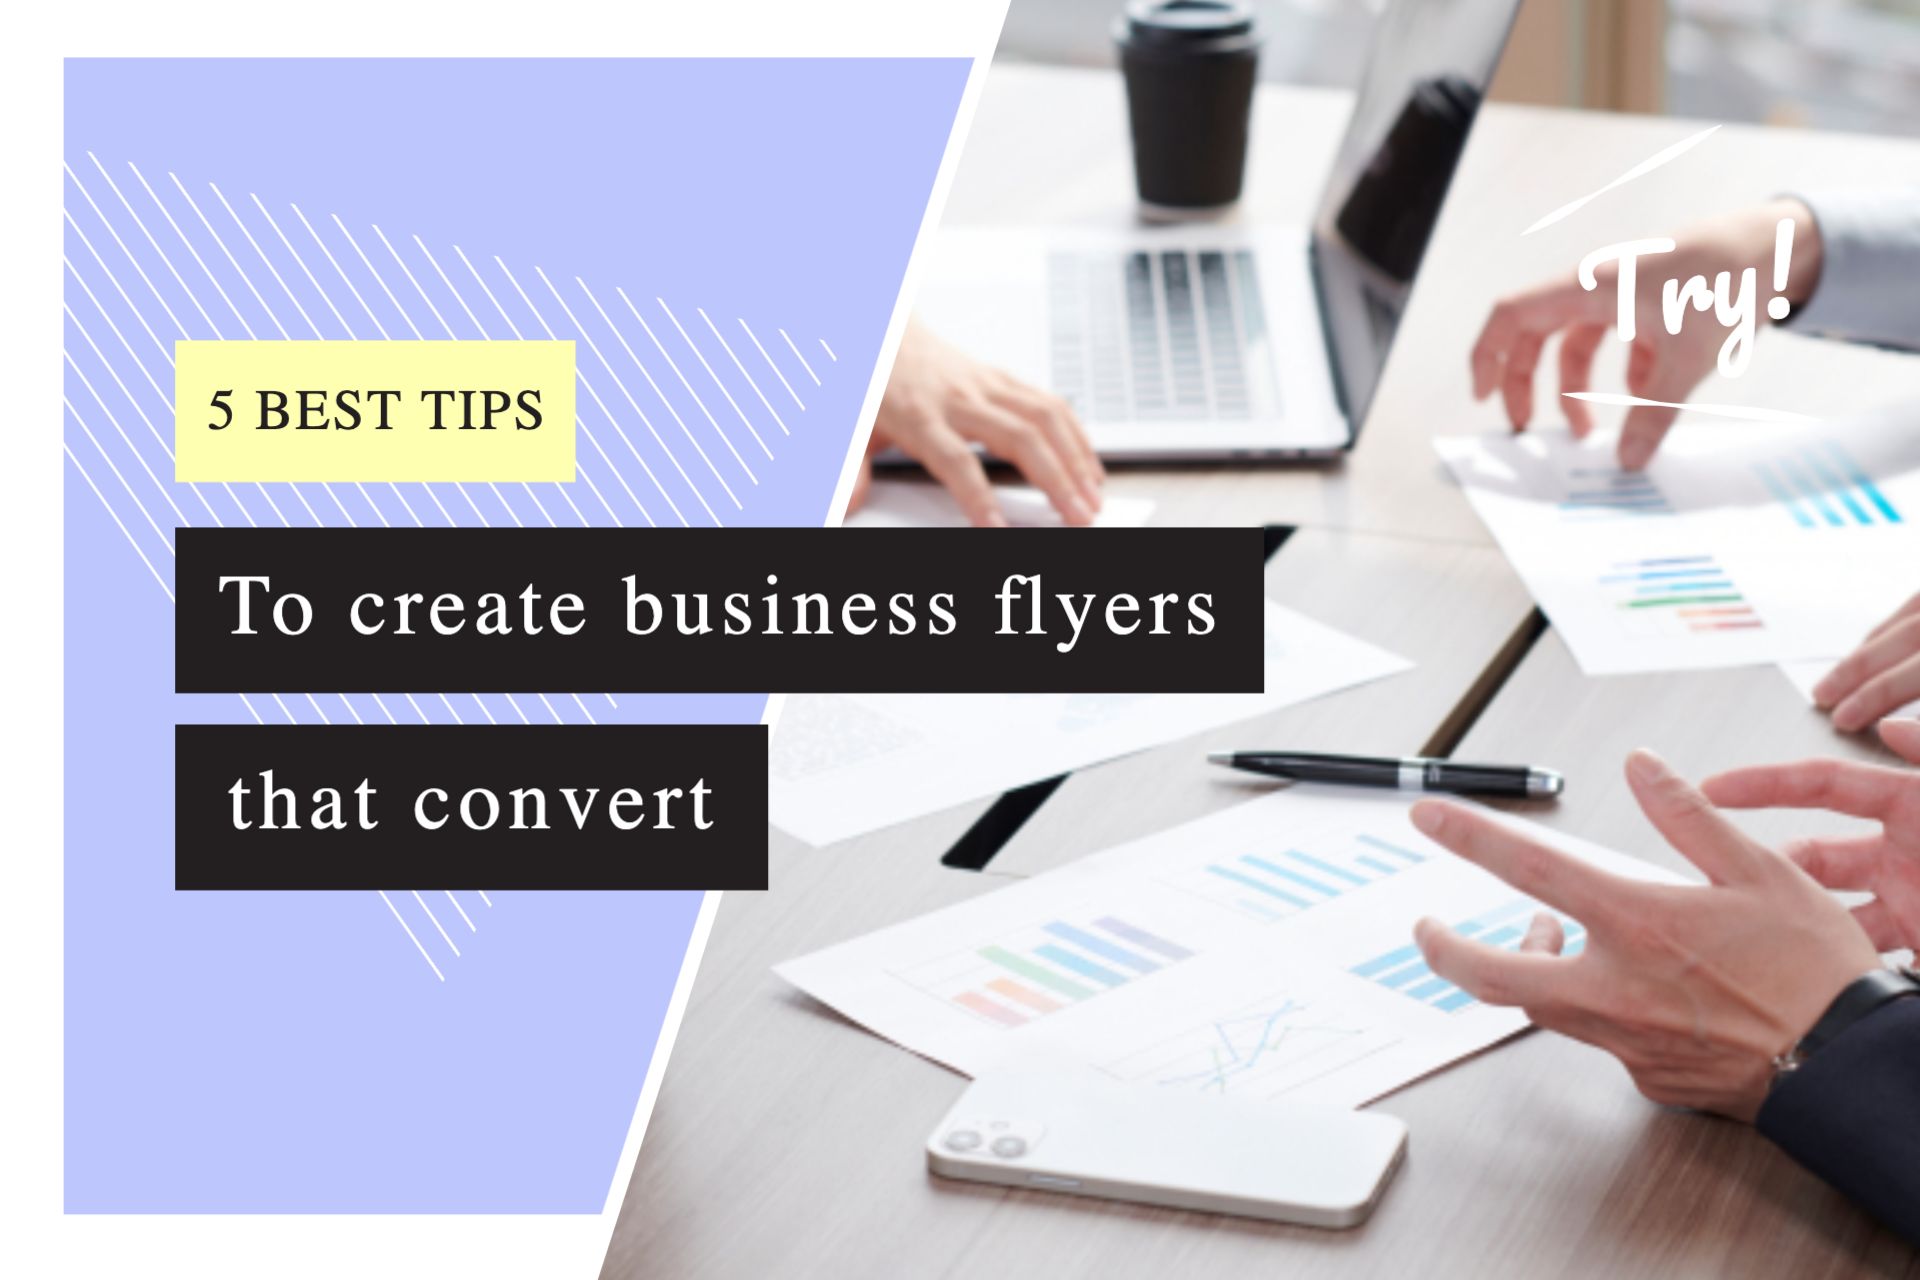 5 best tips to create business flyers that convert